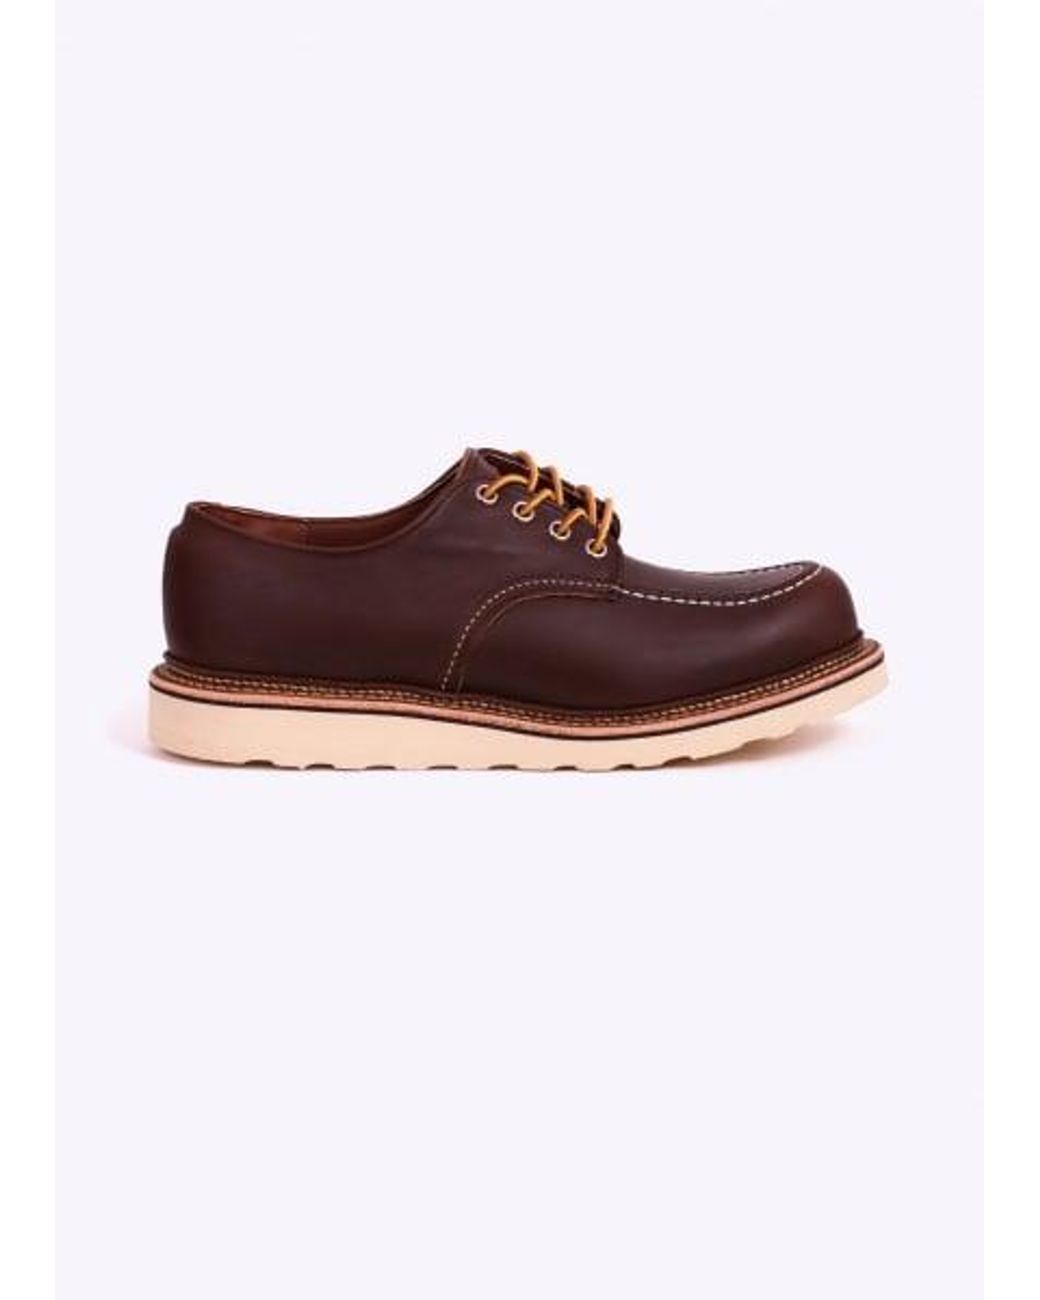 Lyst - Red Wing Classic Oxford Shoe in Brown for Men - Save 61. ...